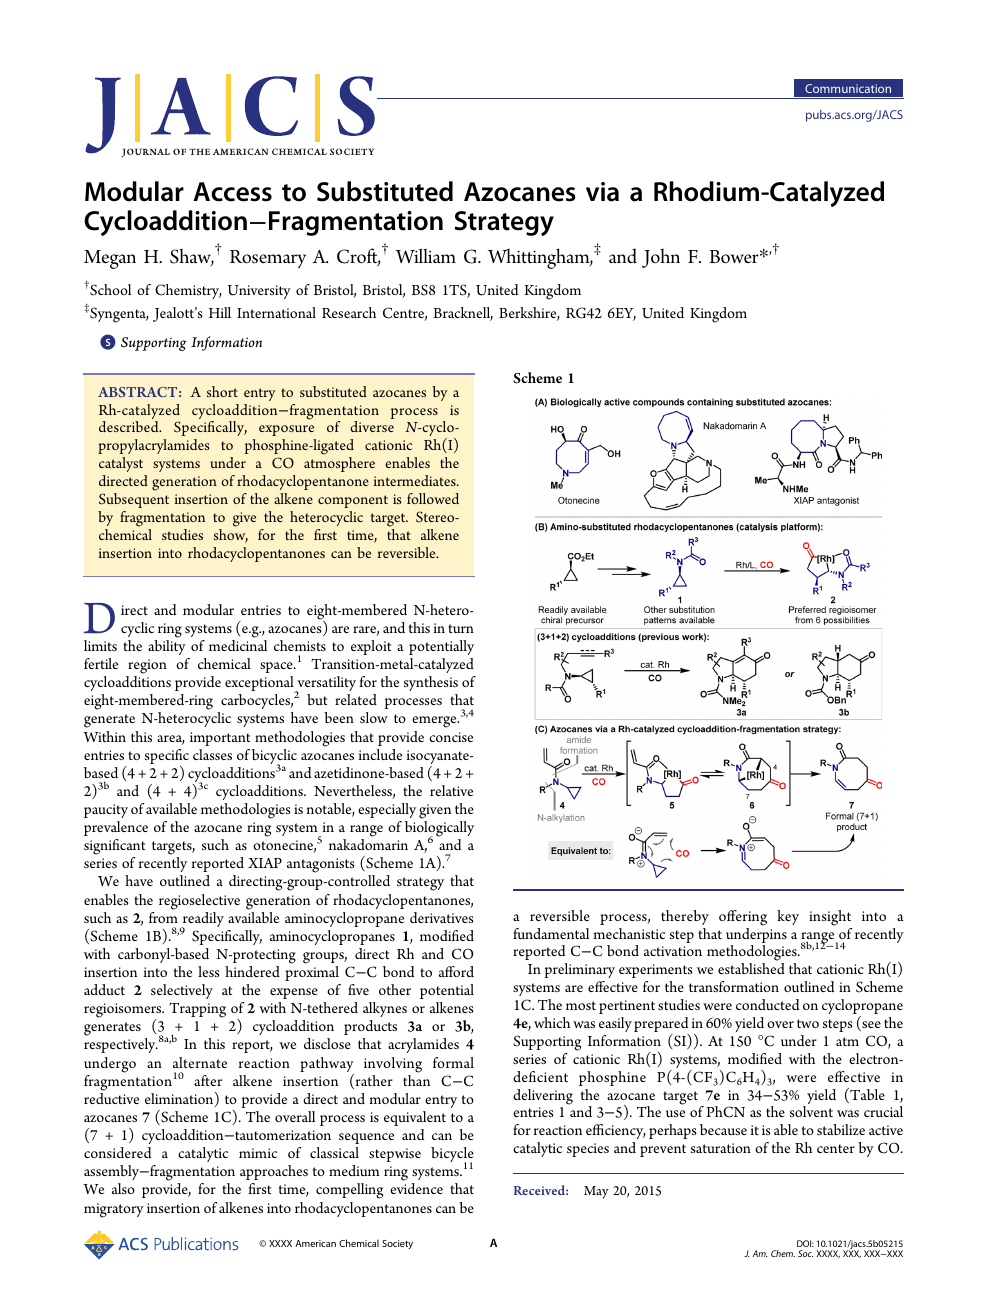 Modular Access To Substituted Azocanes Via A Rhodium Catalyzed Cycloaddition Fragmentation Strategy Topic Of Research Paper In Chemical Sciences Download Scholarly Article Pdf And Read For Free On Cyberleninka Open Science Hub